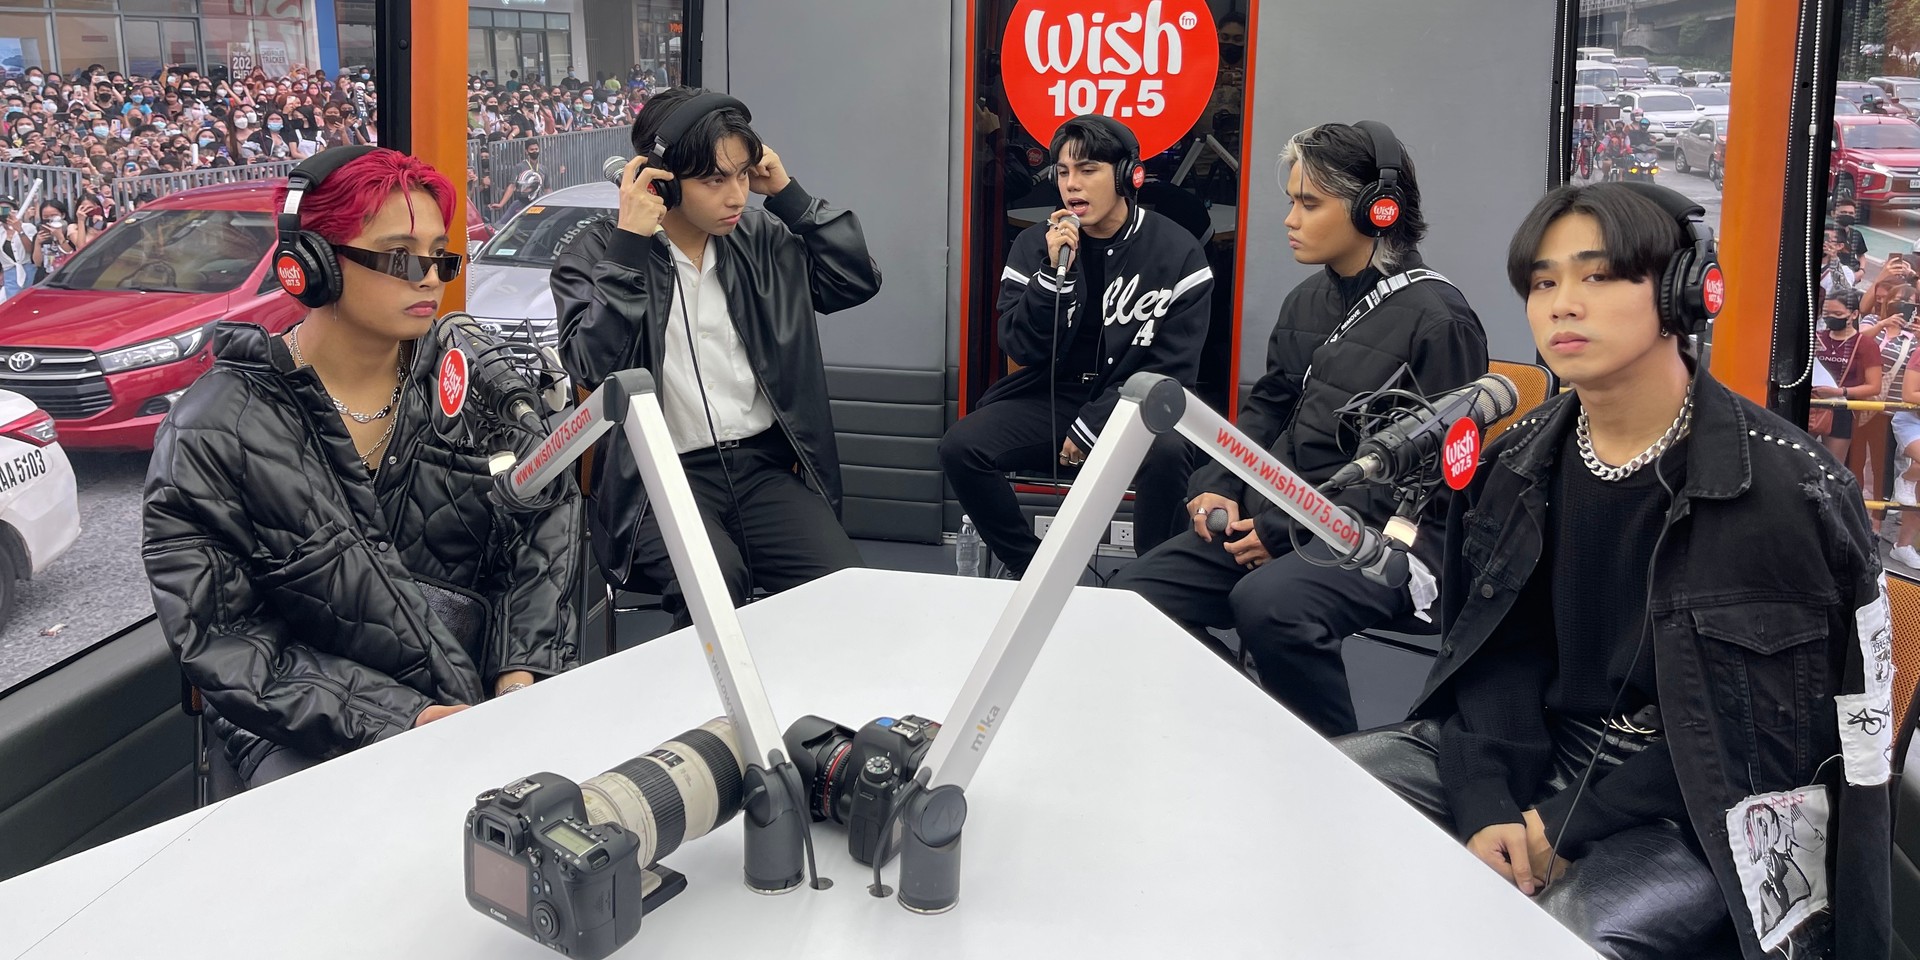 SB19 and A'TIN get together for Wish 107.5 Roadshow – 'MAPA' sing-along, "blue ocean," fan chants, PABLO and FELIP's live debuts, and more